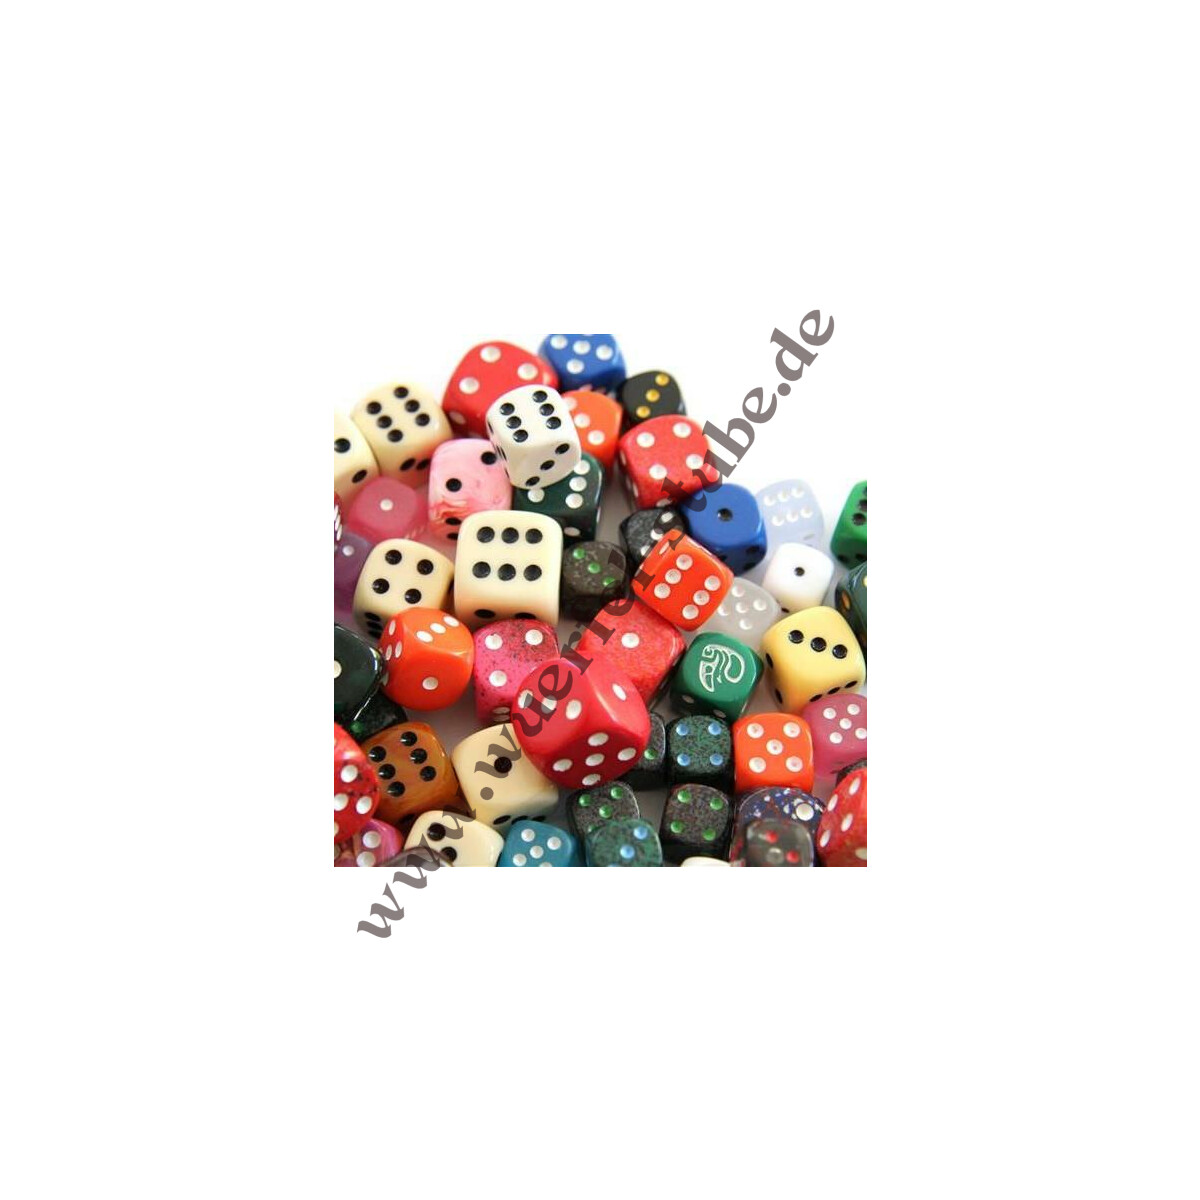 Pound of D6 Dice for sale online Chessex 